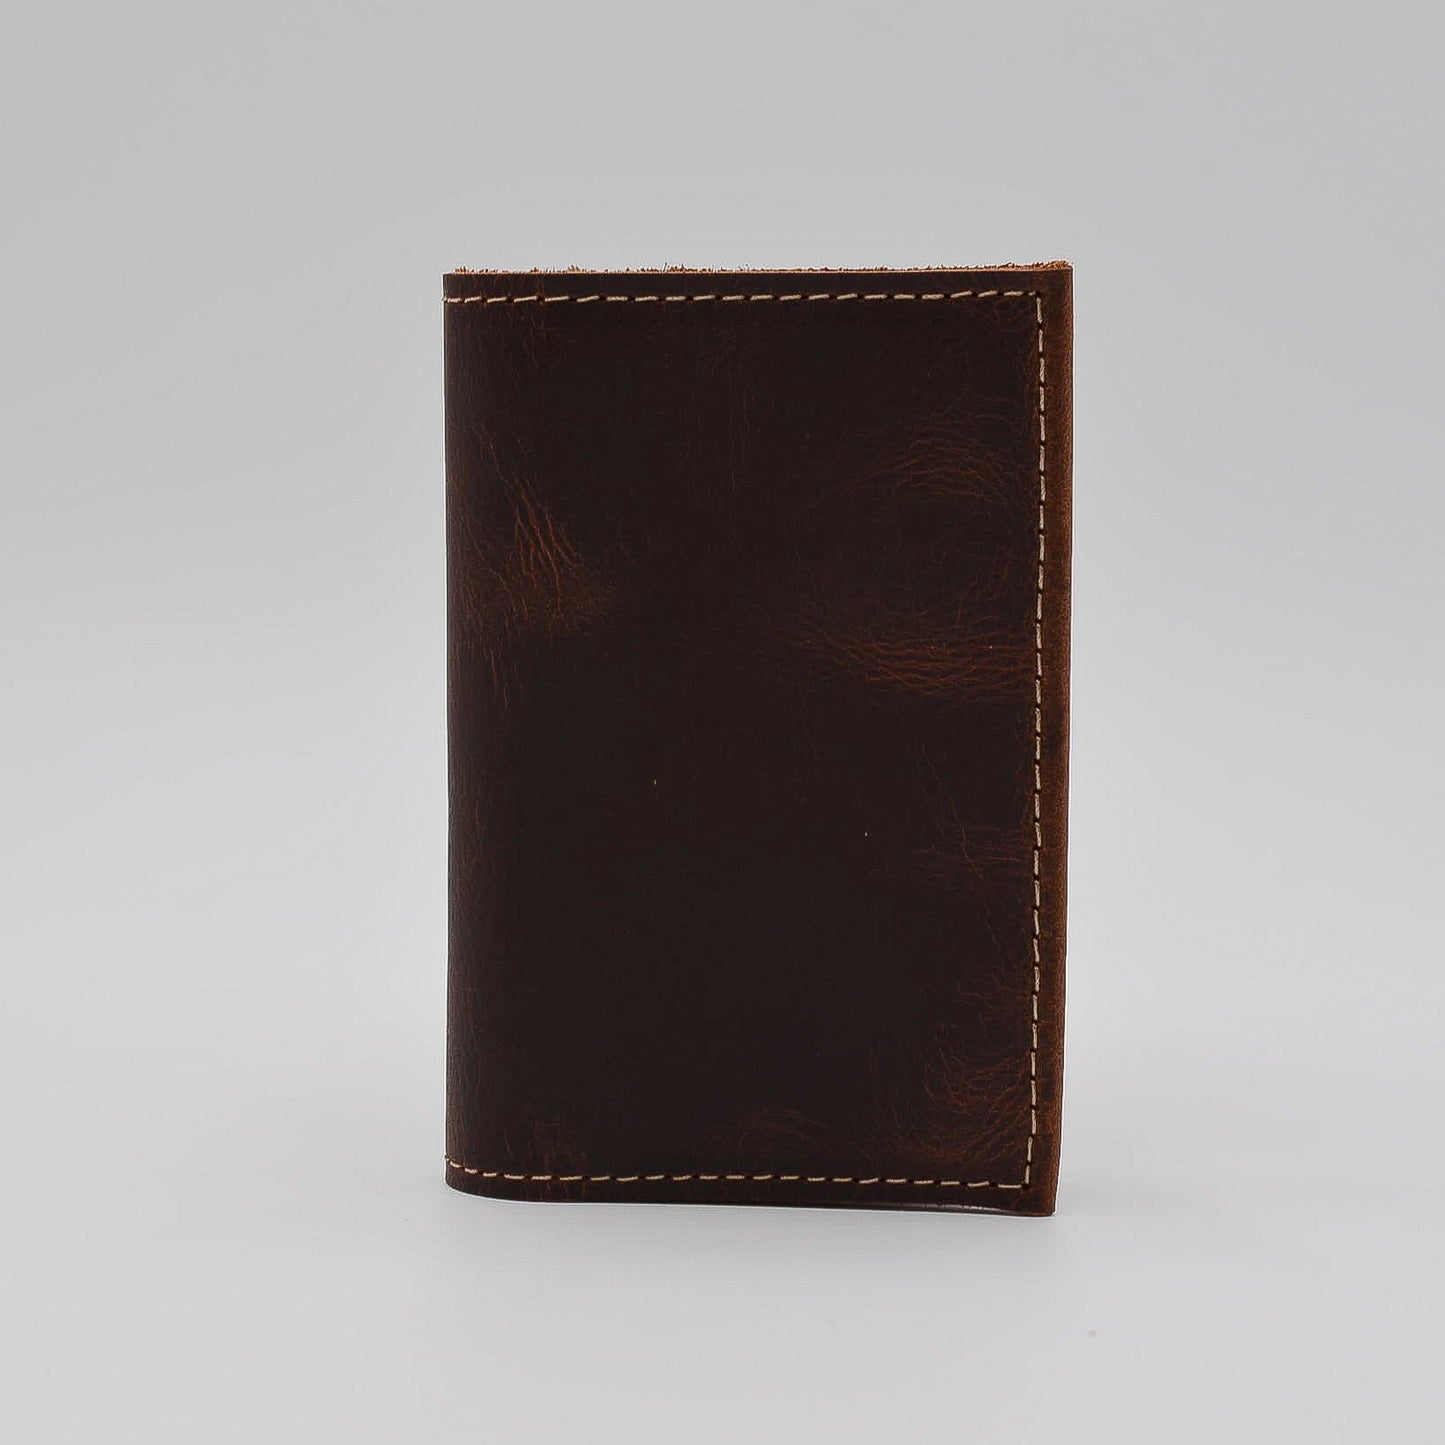 MADE IN THE USA HAND CRAFTED LEATHER 3 X 5 COVER FOR PREFERENCE COLLECTION WIRED WIREBOUND REFILL PD42WI brown